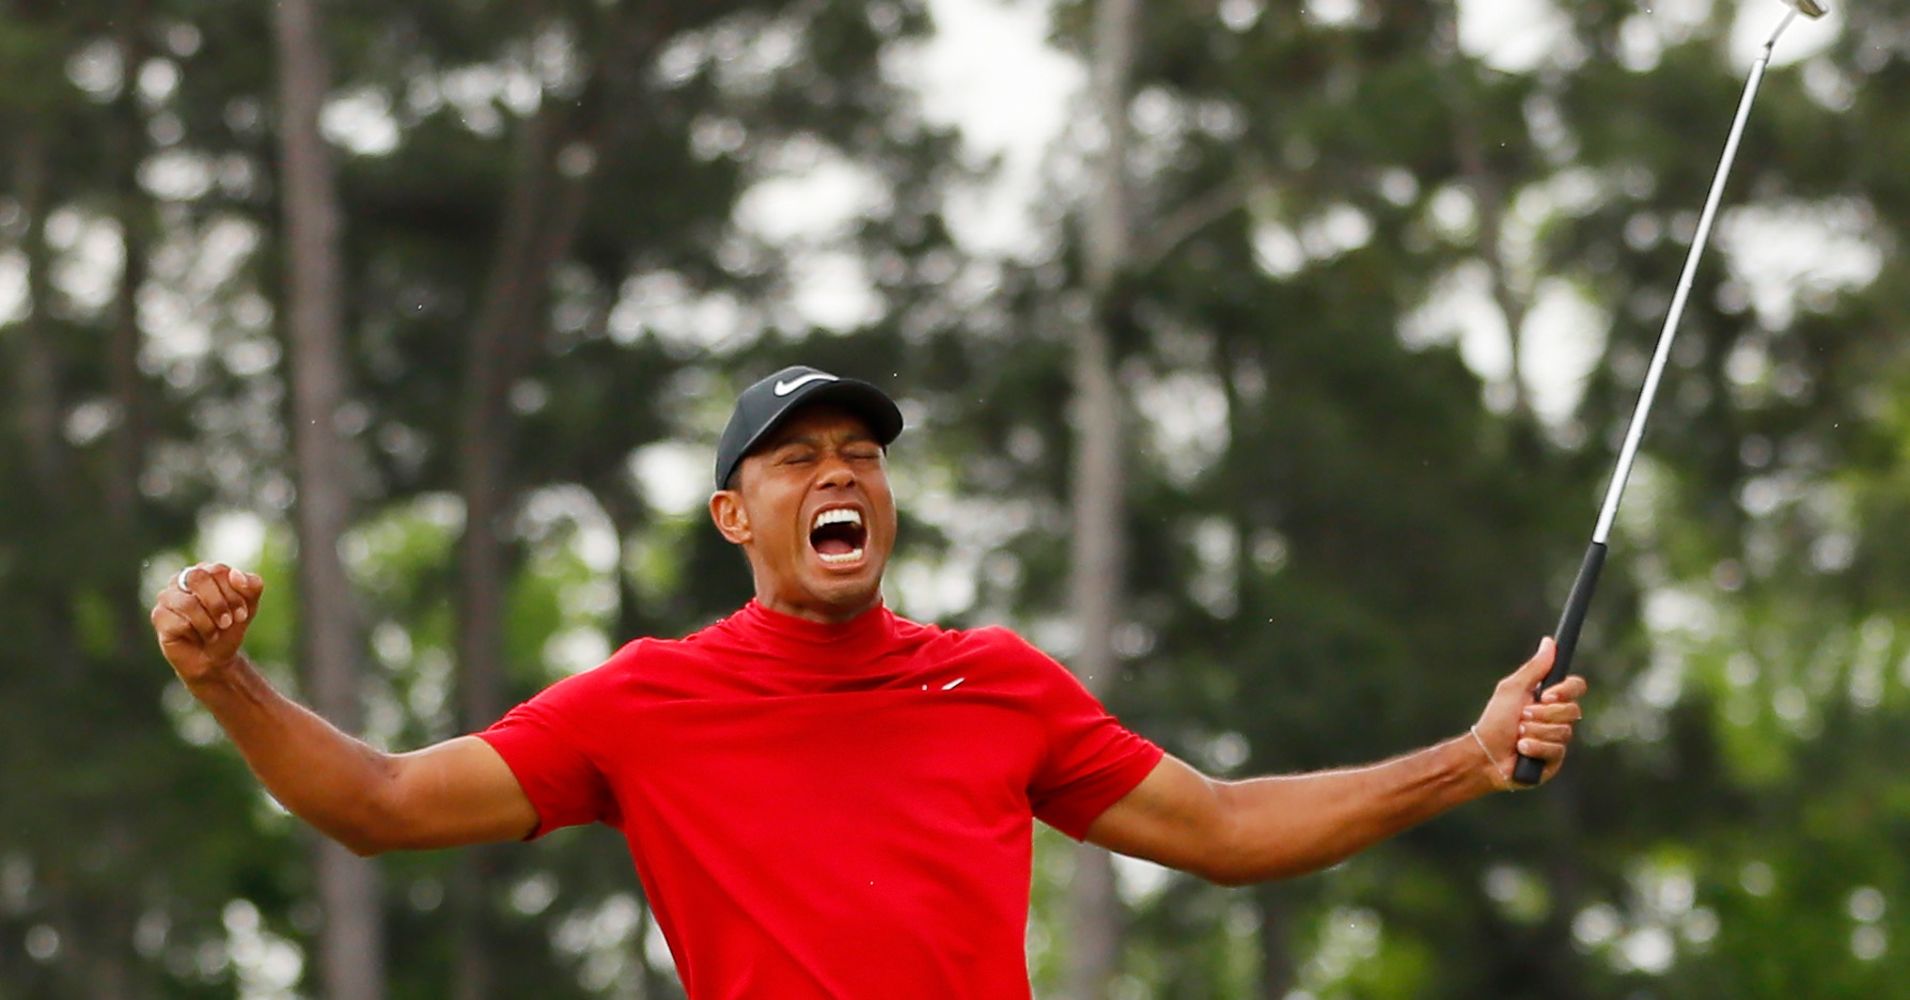 These stocks could benefit from Tiger Woods' Masters win